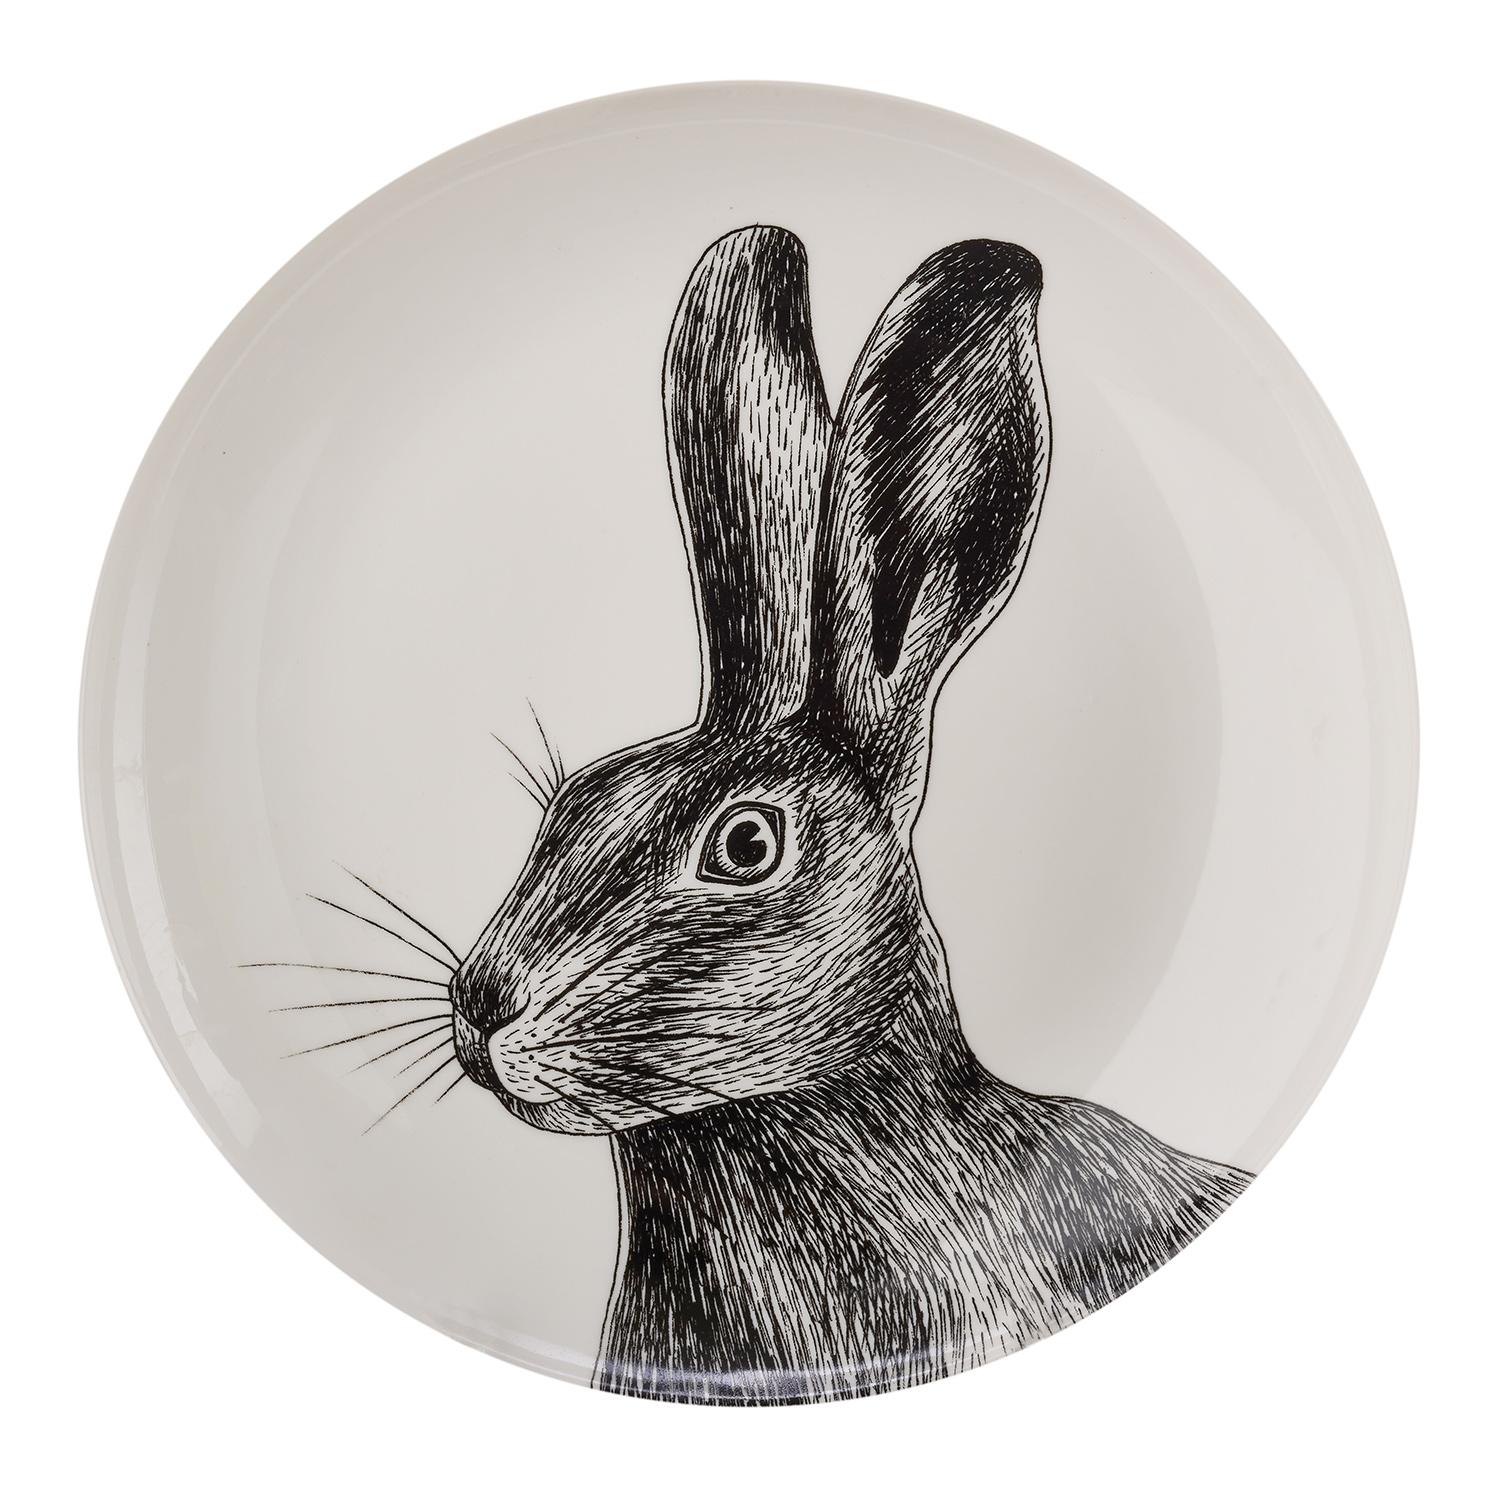 Joyfully dine with these animal portrait plates. Each plate is handcrafted out of porcelain with a glazed finish featuring wonderfully detailed illustrations by Het Paradijs. Each plate has different animal illustrated decals that feature a rabbit,